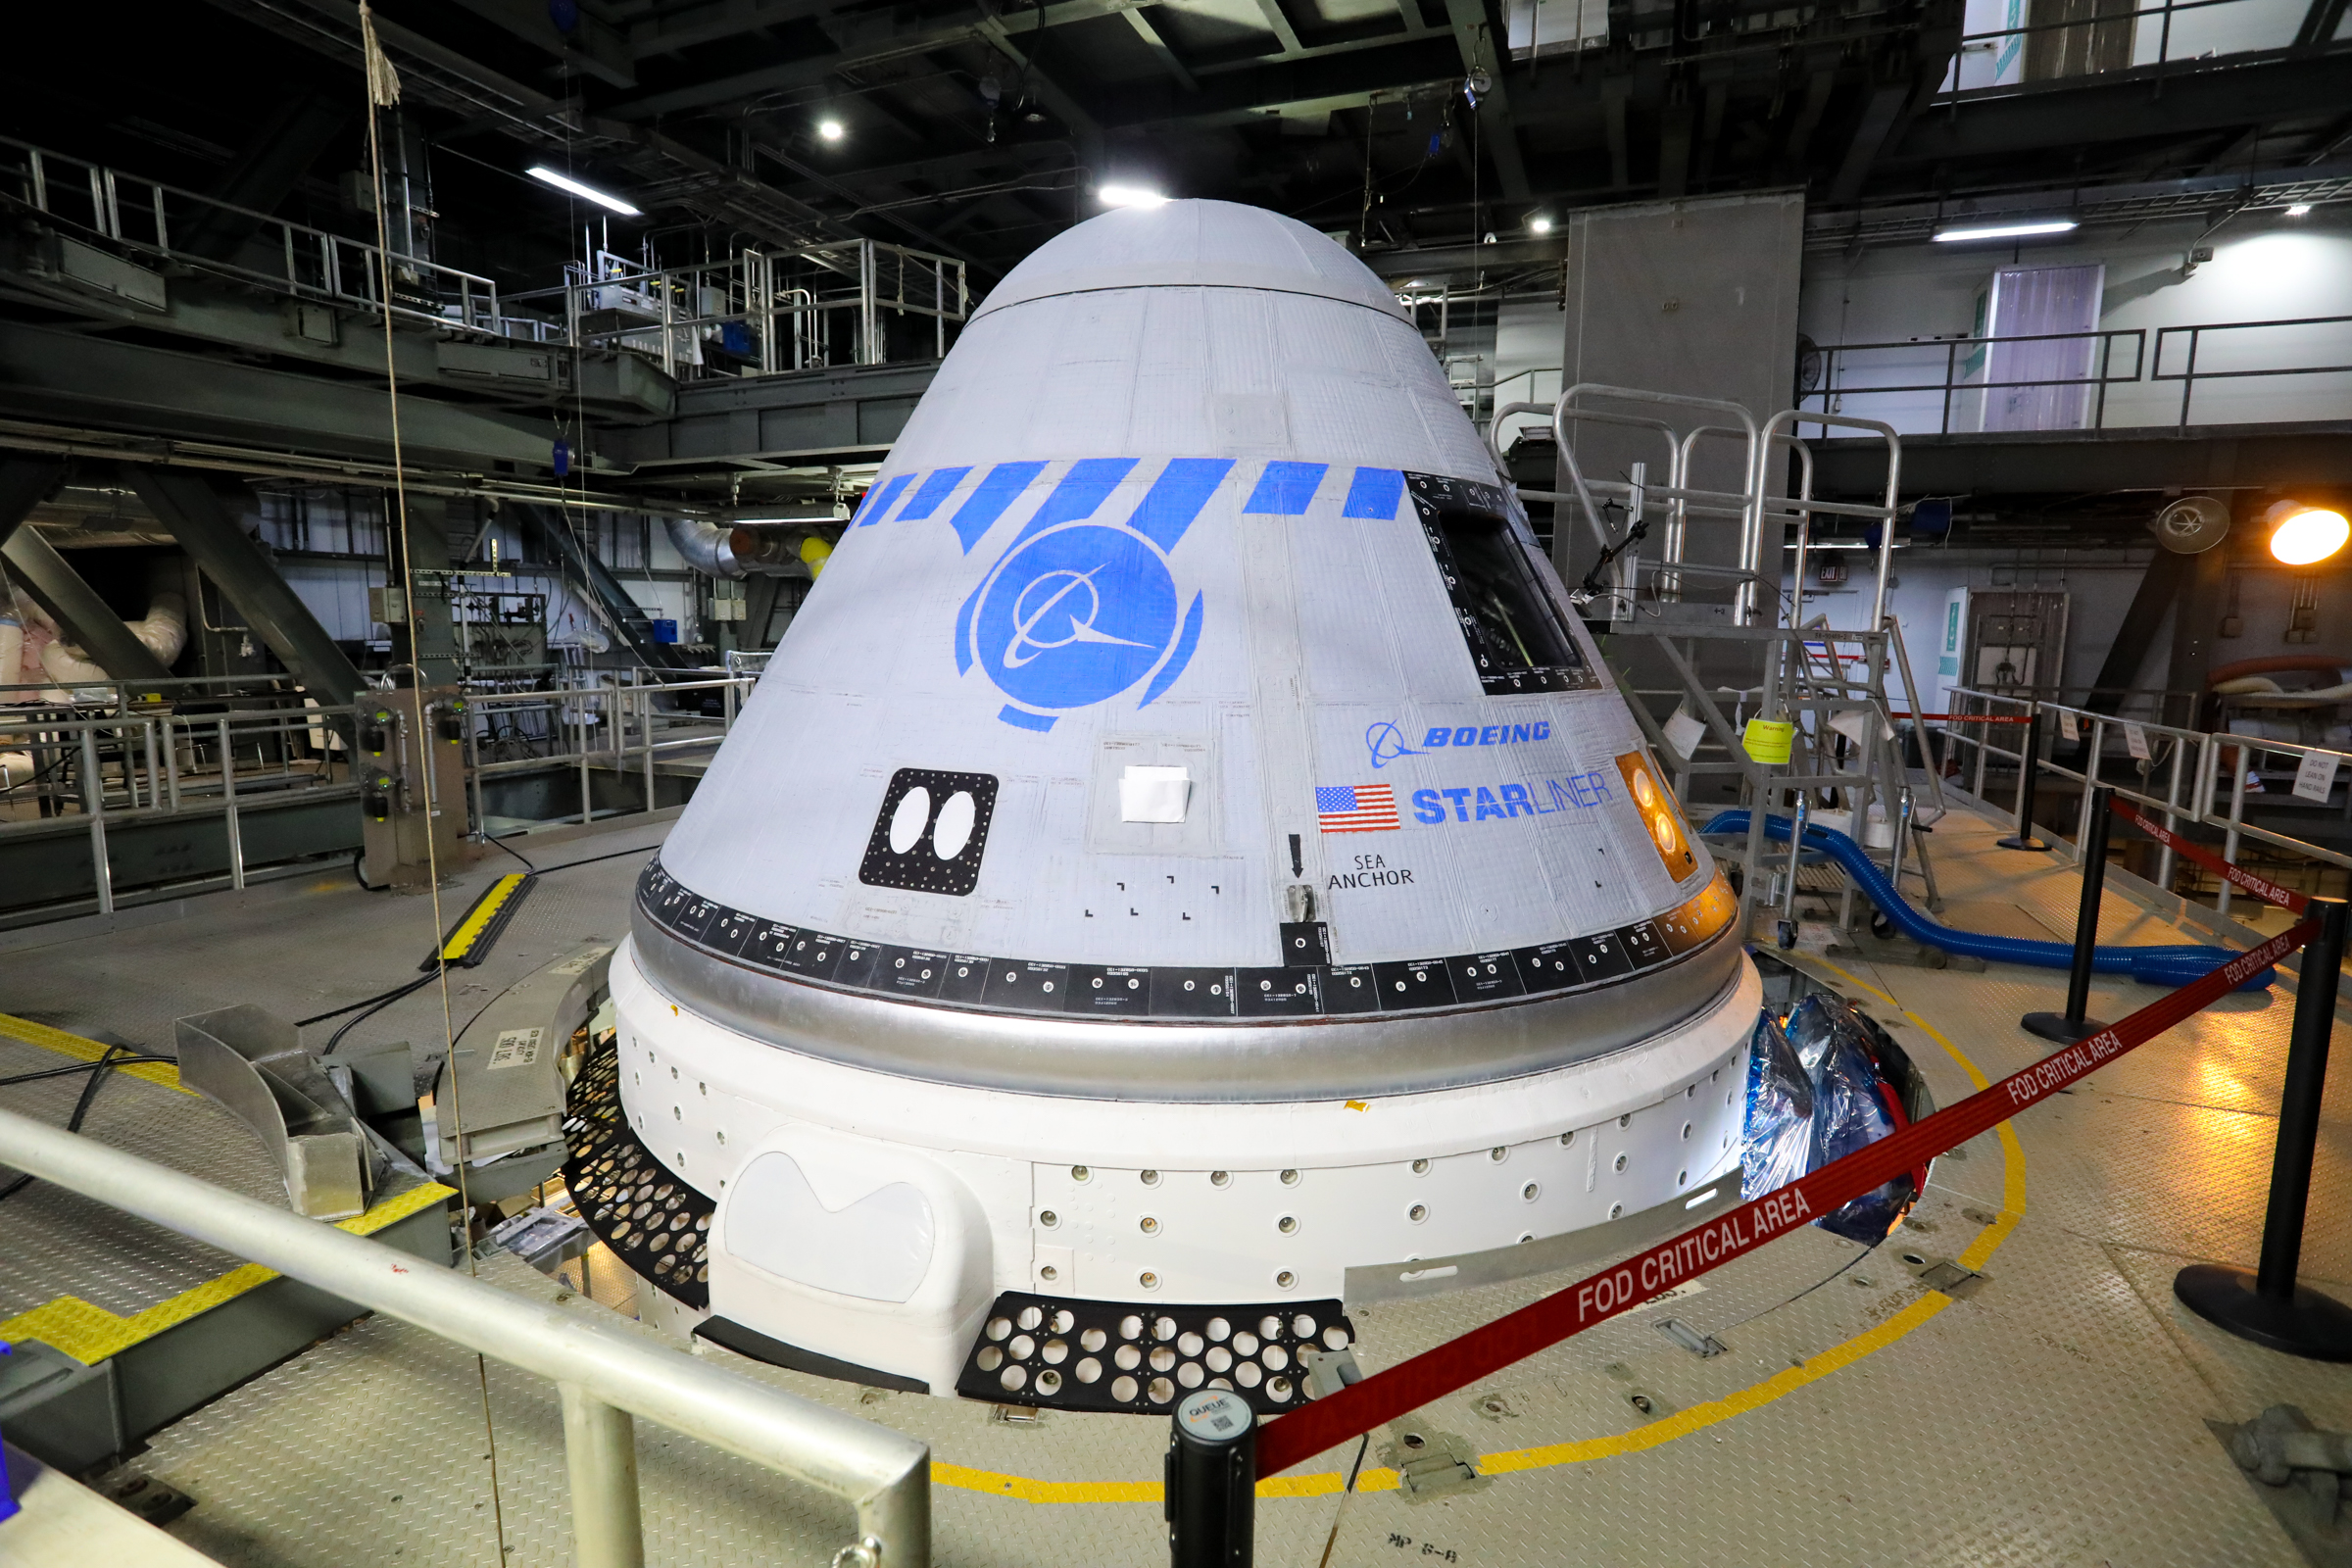 Starliner Test Flight Setback Facing Lengthy Months Long Delay to Fix Faulty Propulsion Valves